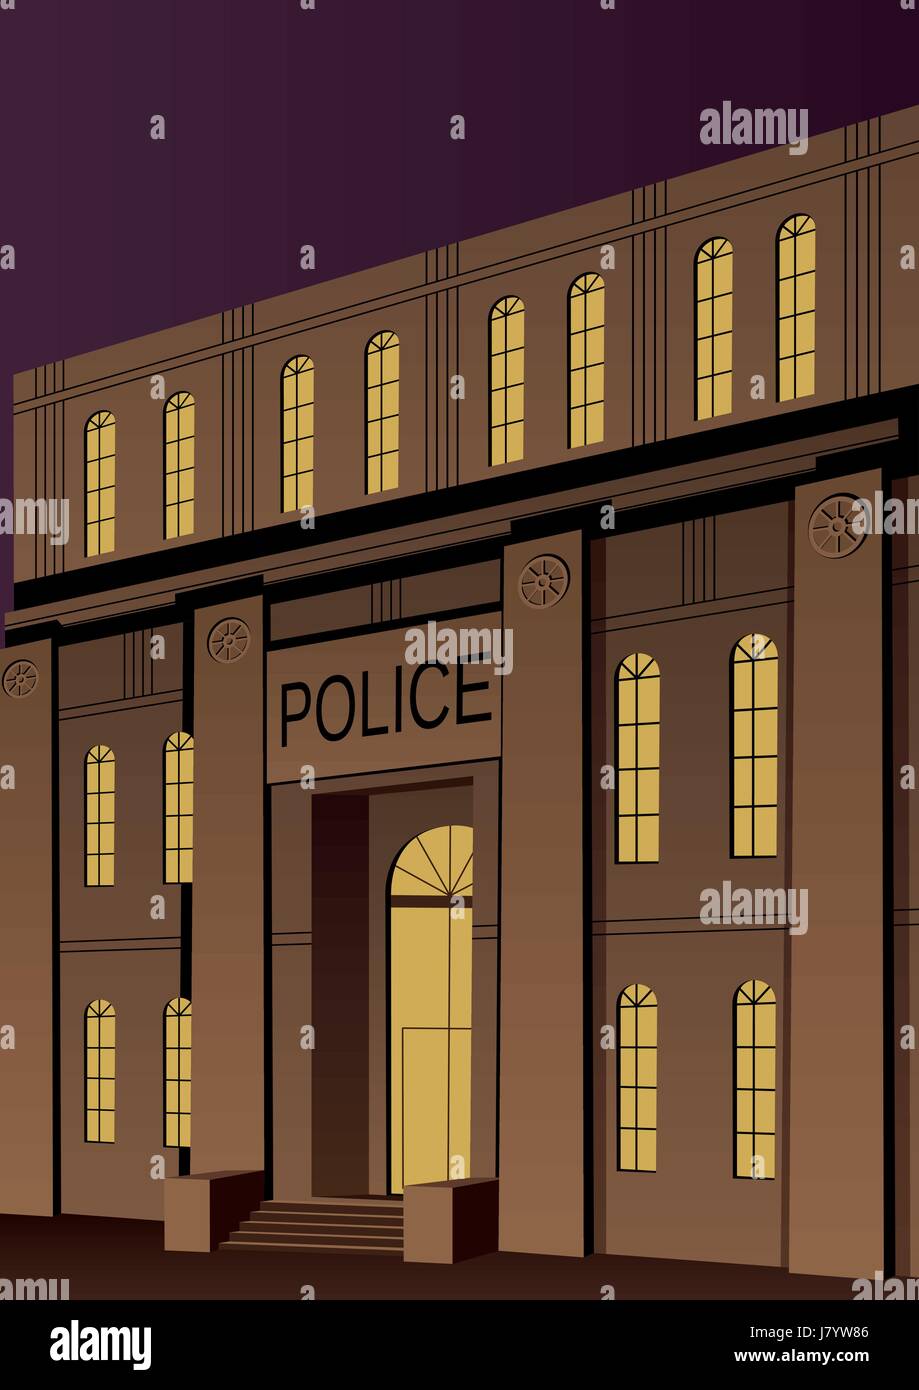 Illustration of police station in Art Deco style. Stock Vector